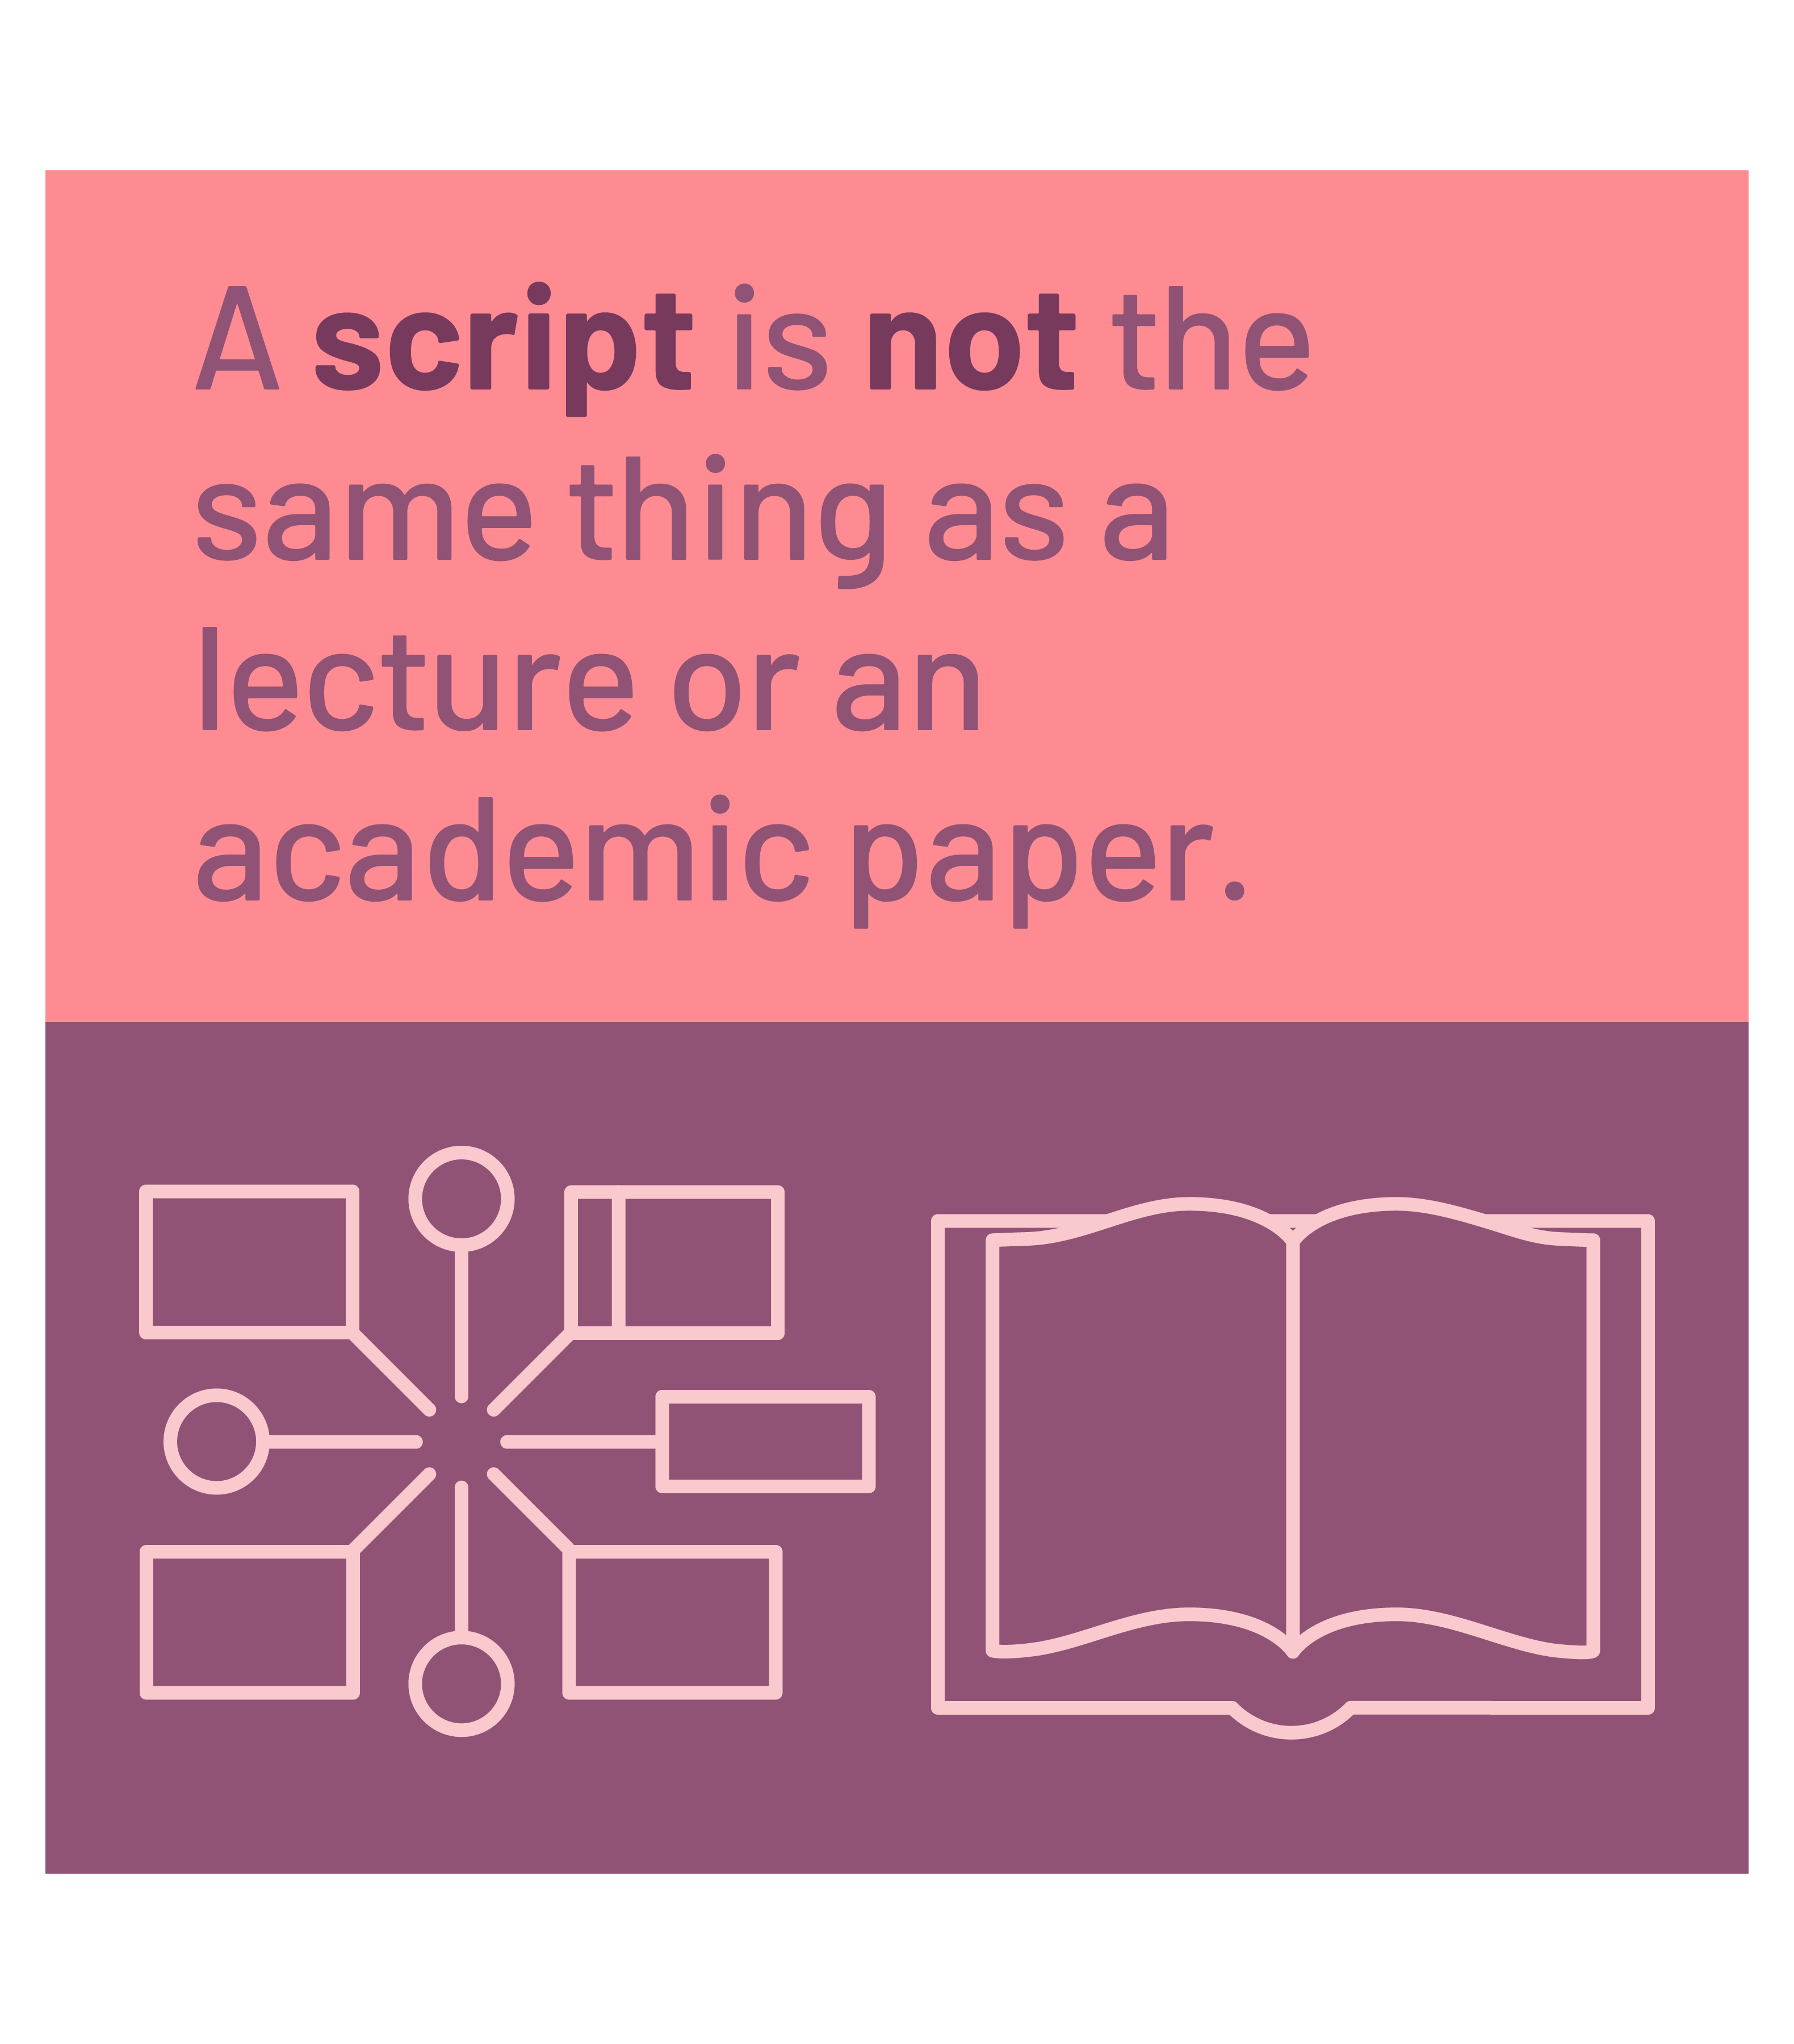 Text and illustration of a script is not the same thing as an academic paper